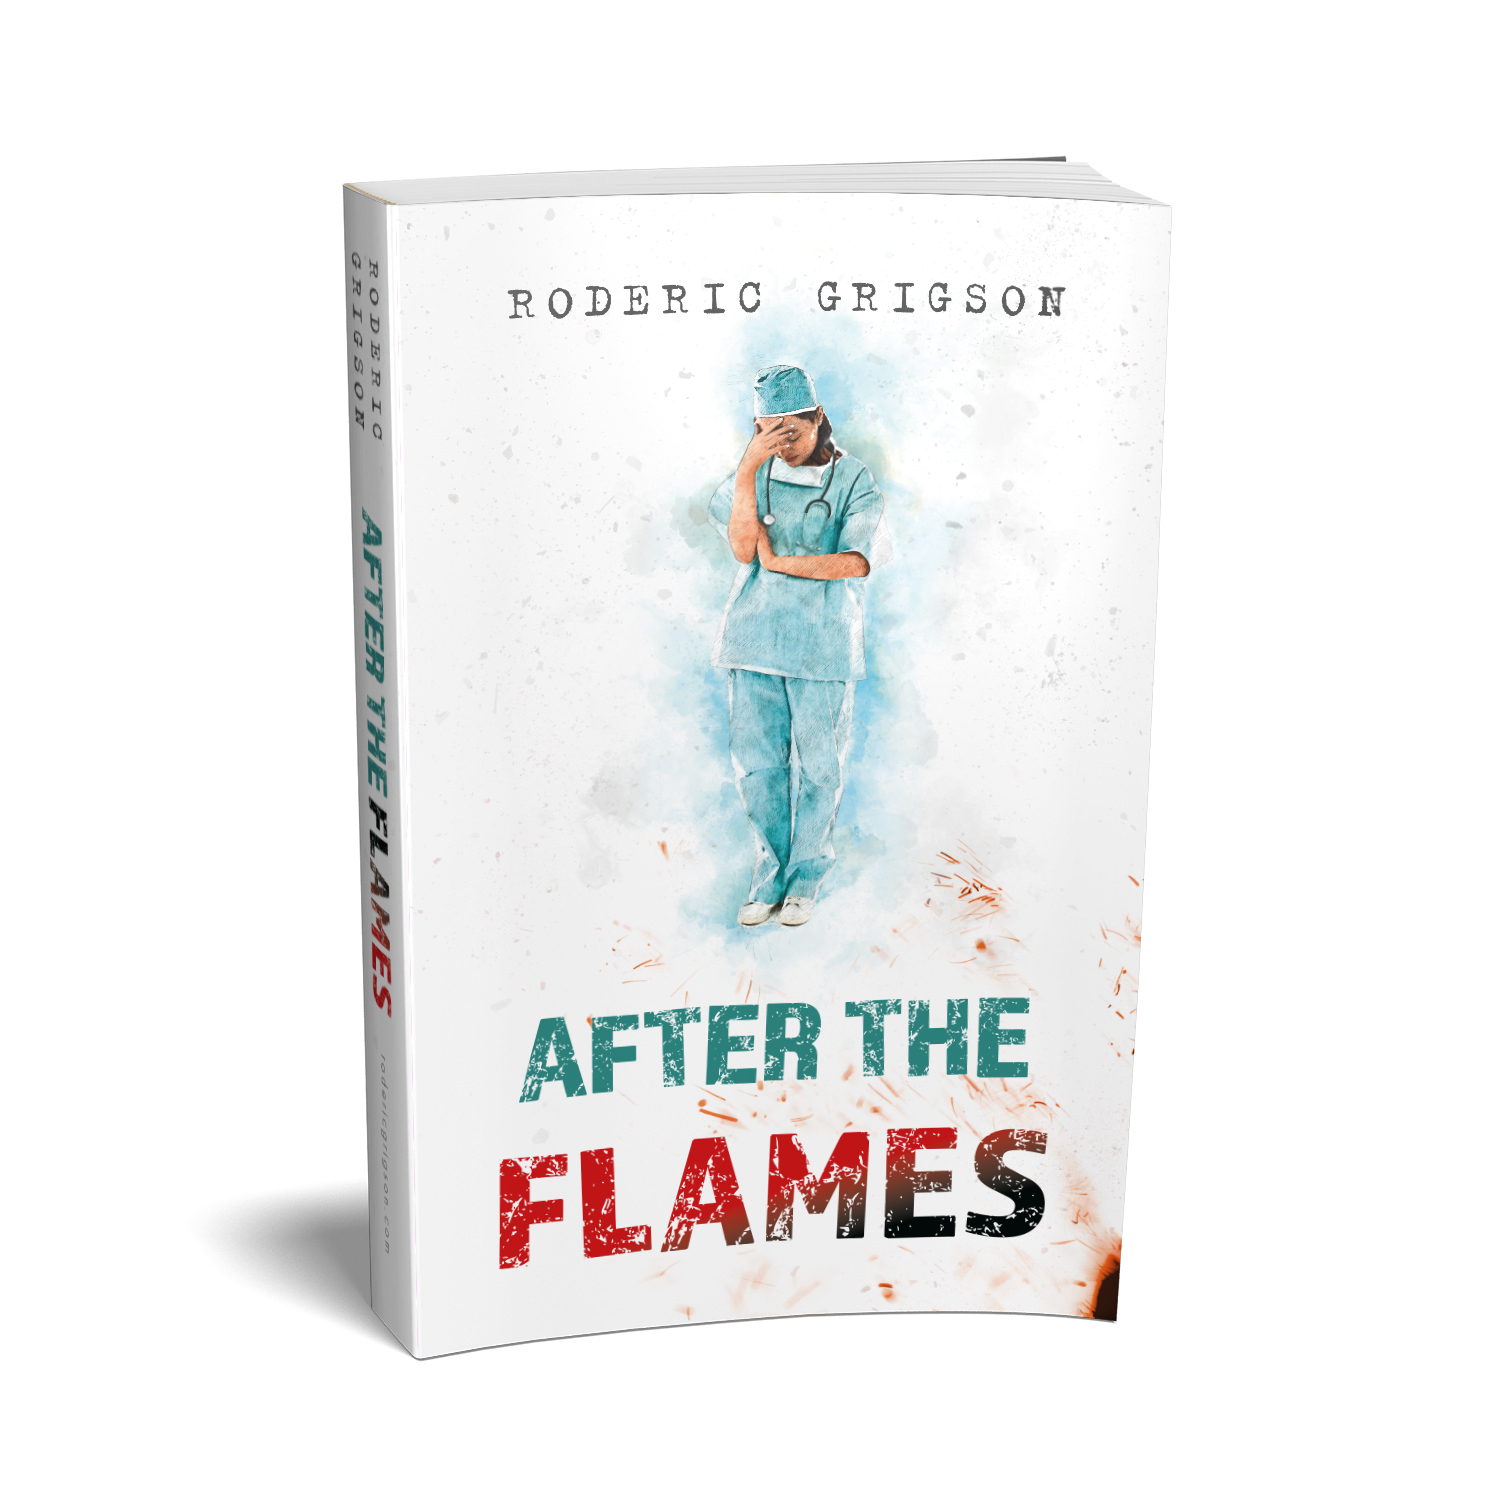 'After The Flames' is realistic dramatic novel by Roderic Grigson, set during the recent Sri Lankan Civil War. The book cover was designed by Mark Thomas, of coverness.com. To find out more about my book design services, please visit www.coverness.com.